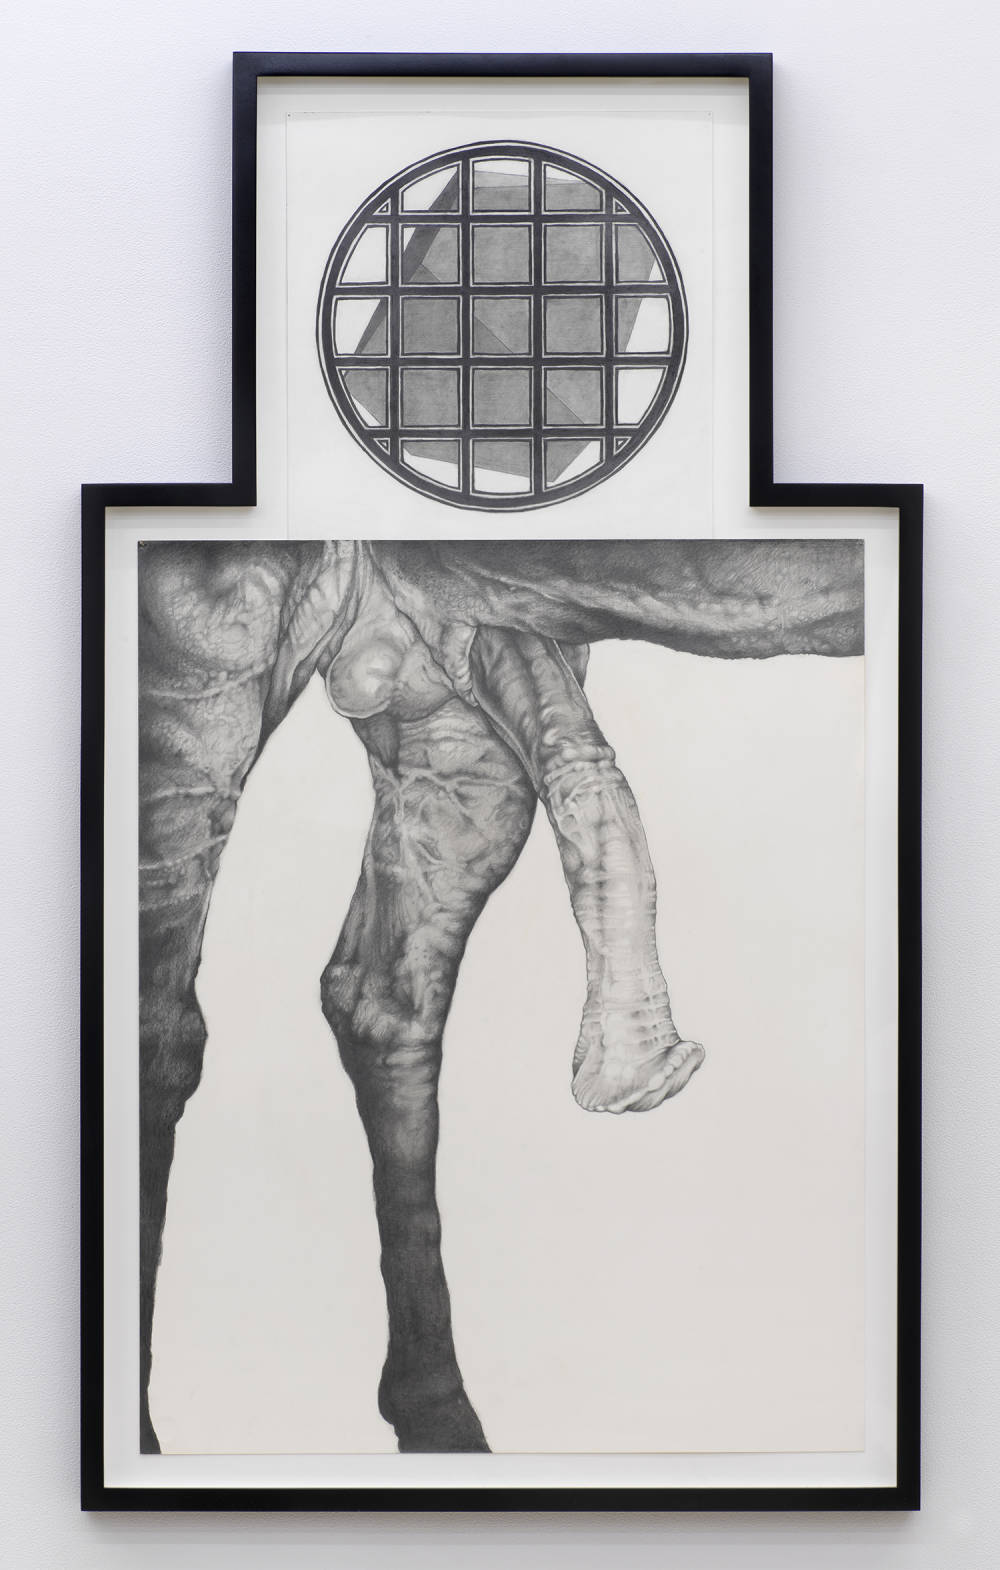 On a gallery wall a graphite drawing depicting a close-up of horse genitals. Drawn above is circular form containing a gridded, bar-like pattern in front of a cube in an irregularly shaped black frame. 